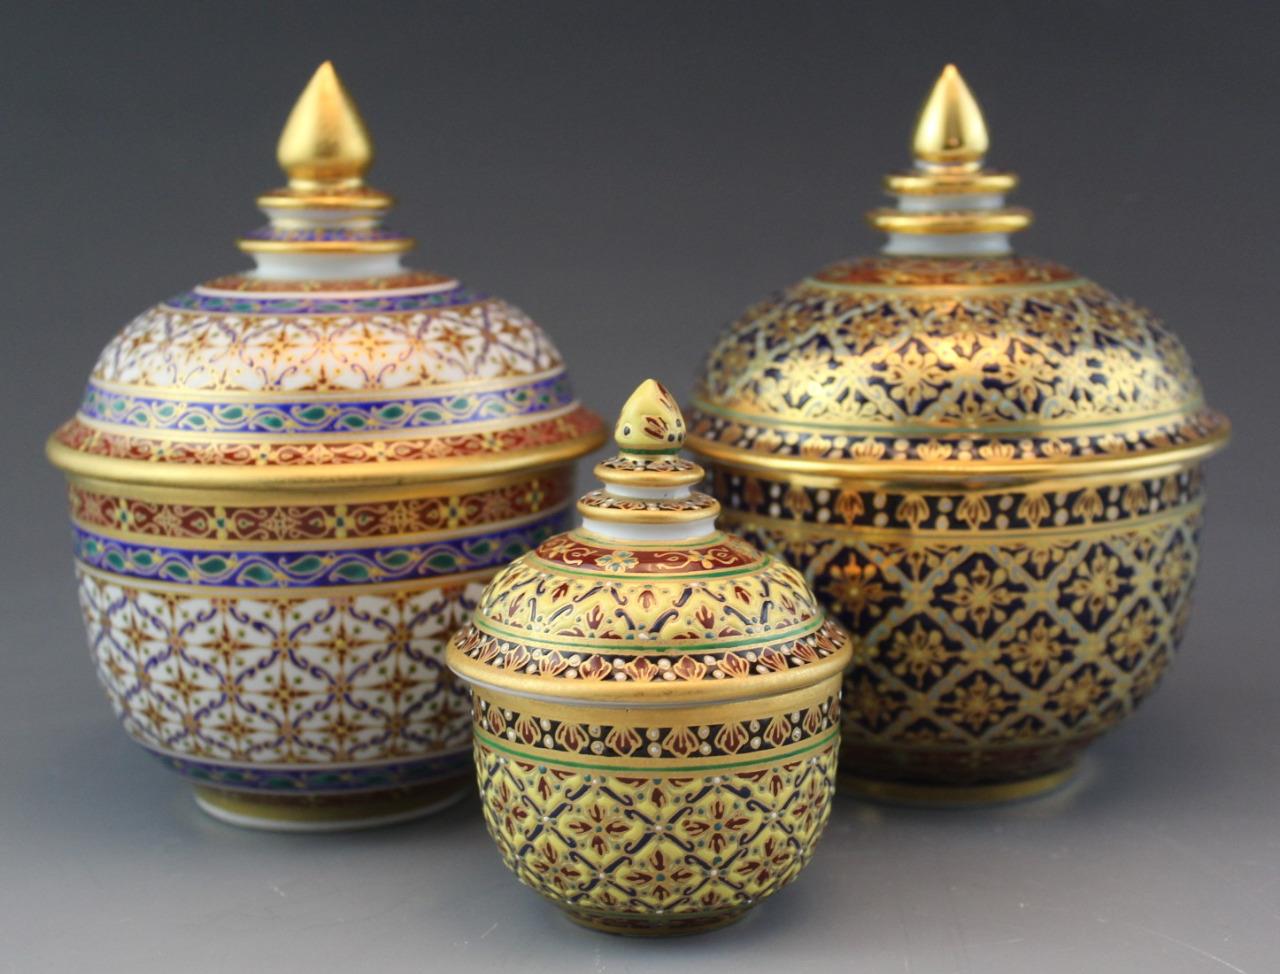 Group of 3 Persian Style Porcelain Covered Bowls or Cups Thai Benjarong ...